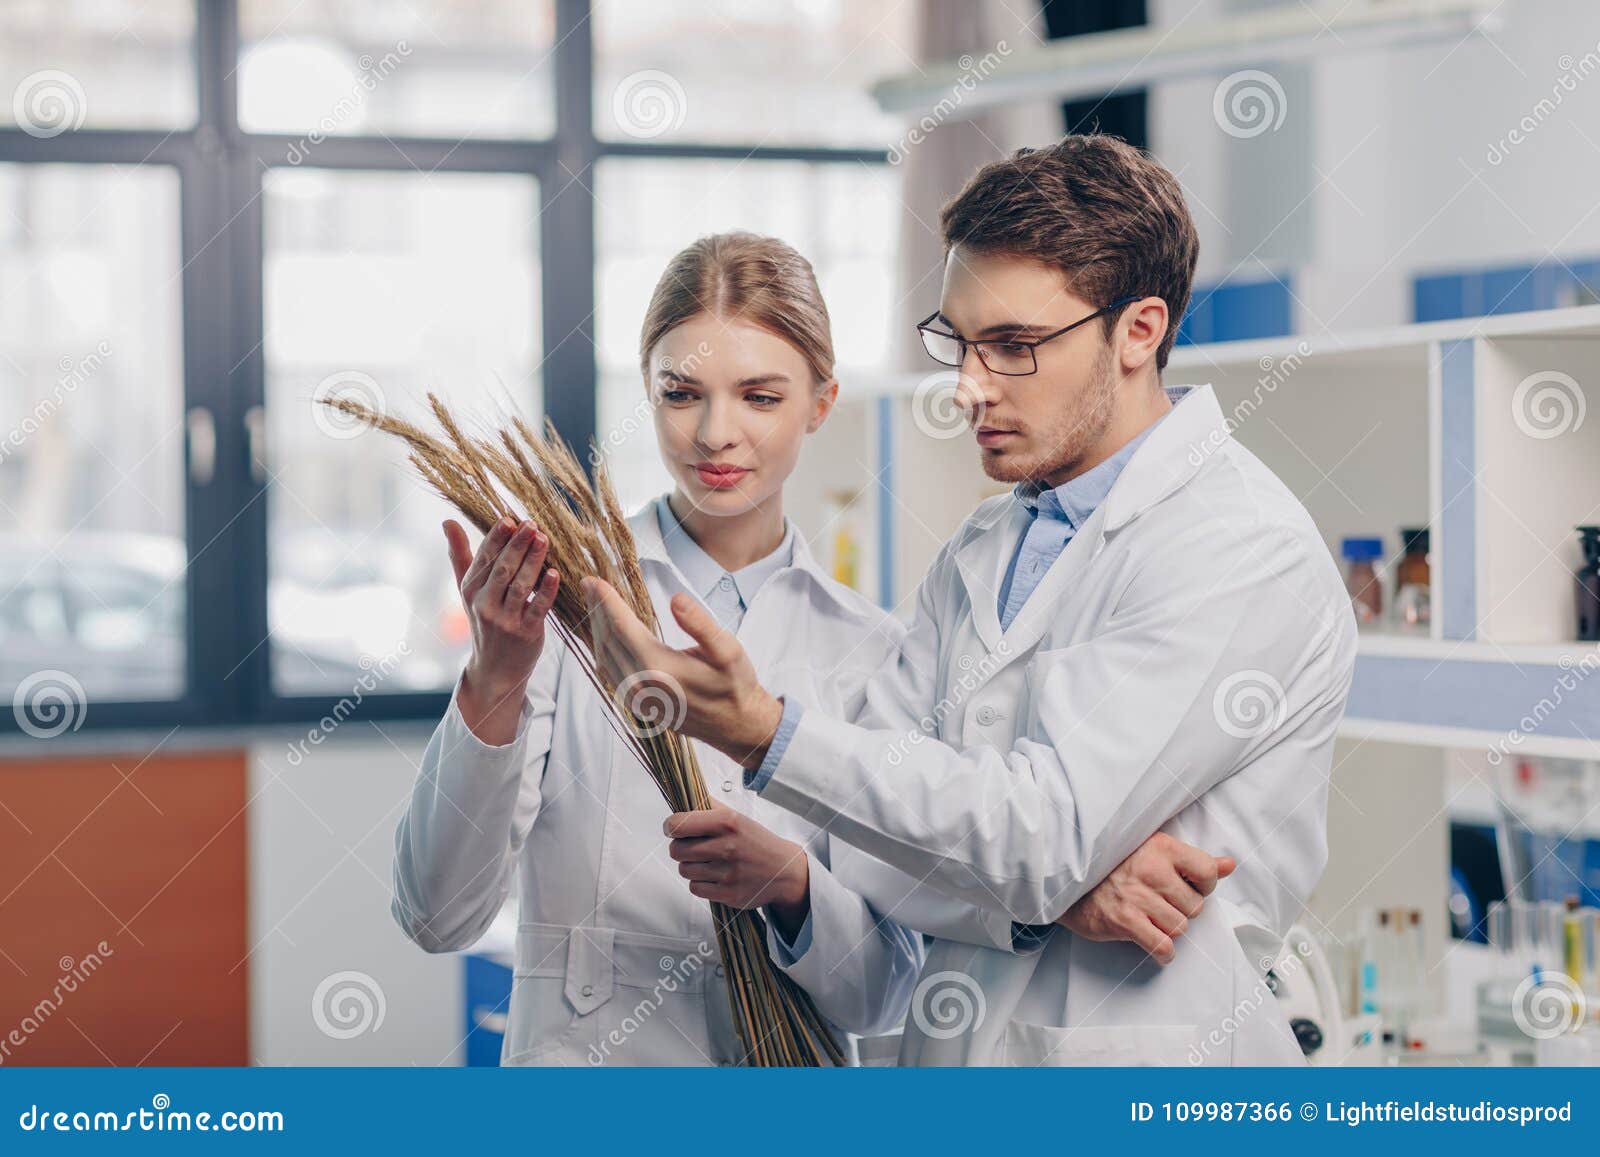 biologists working with wheat ears